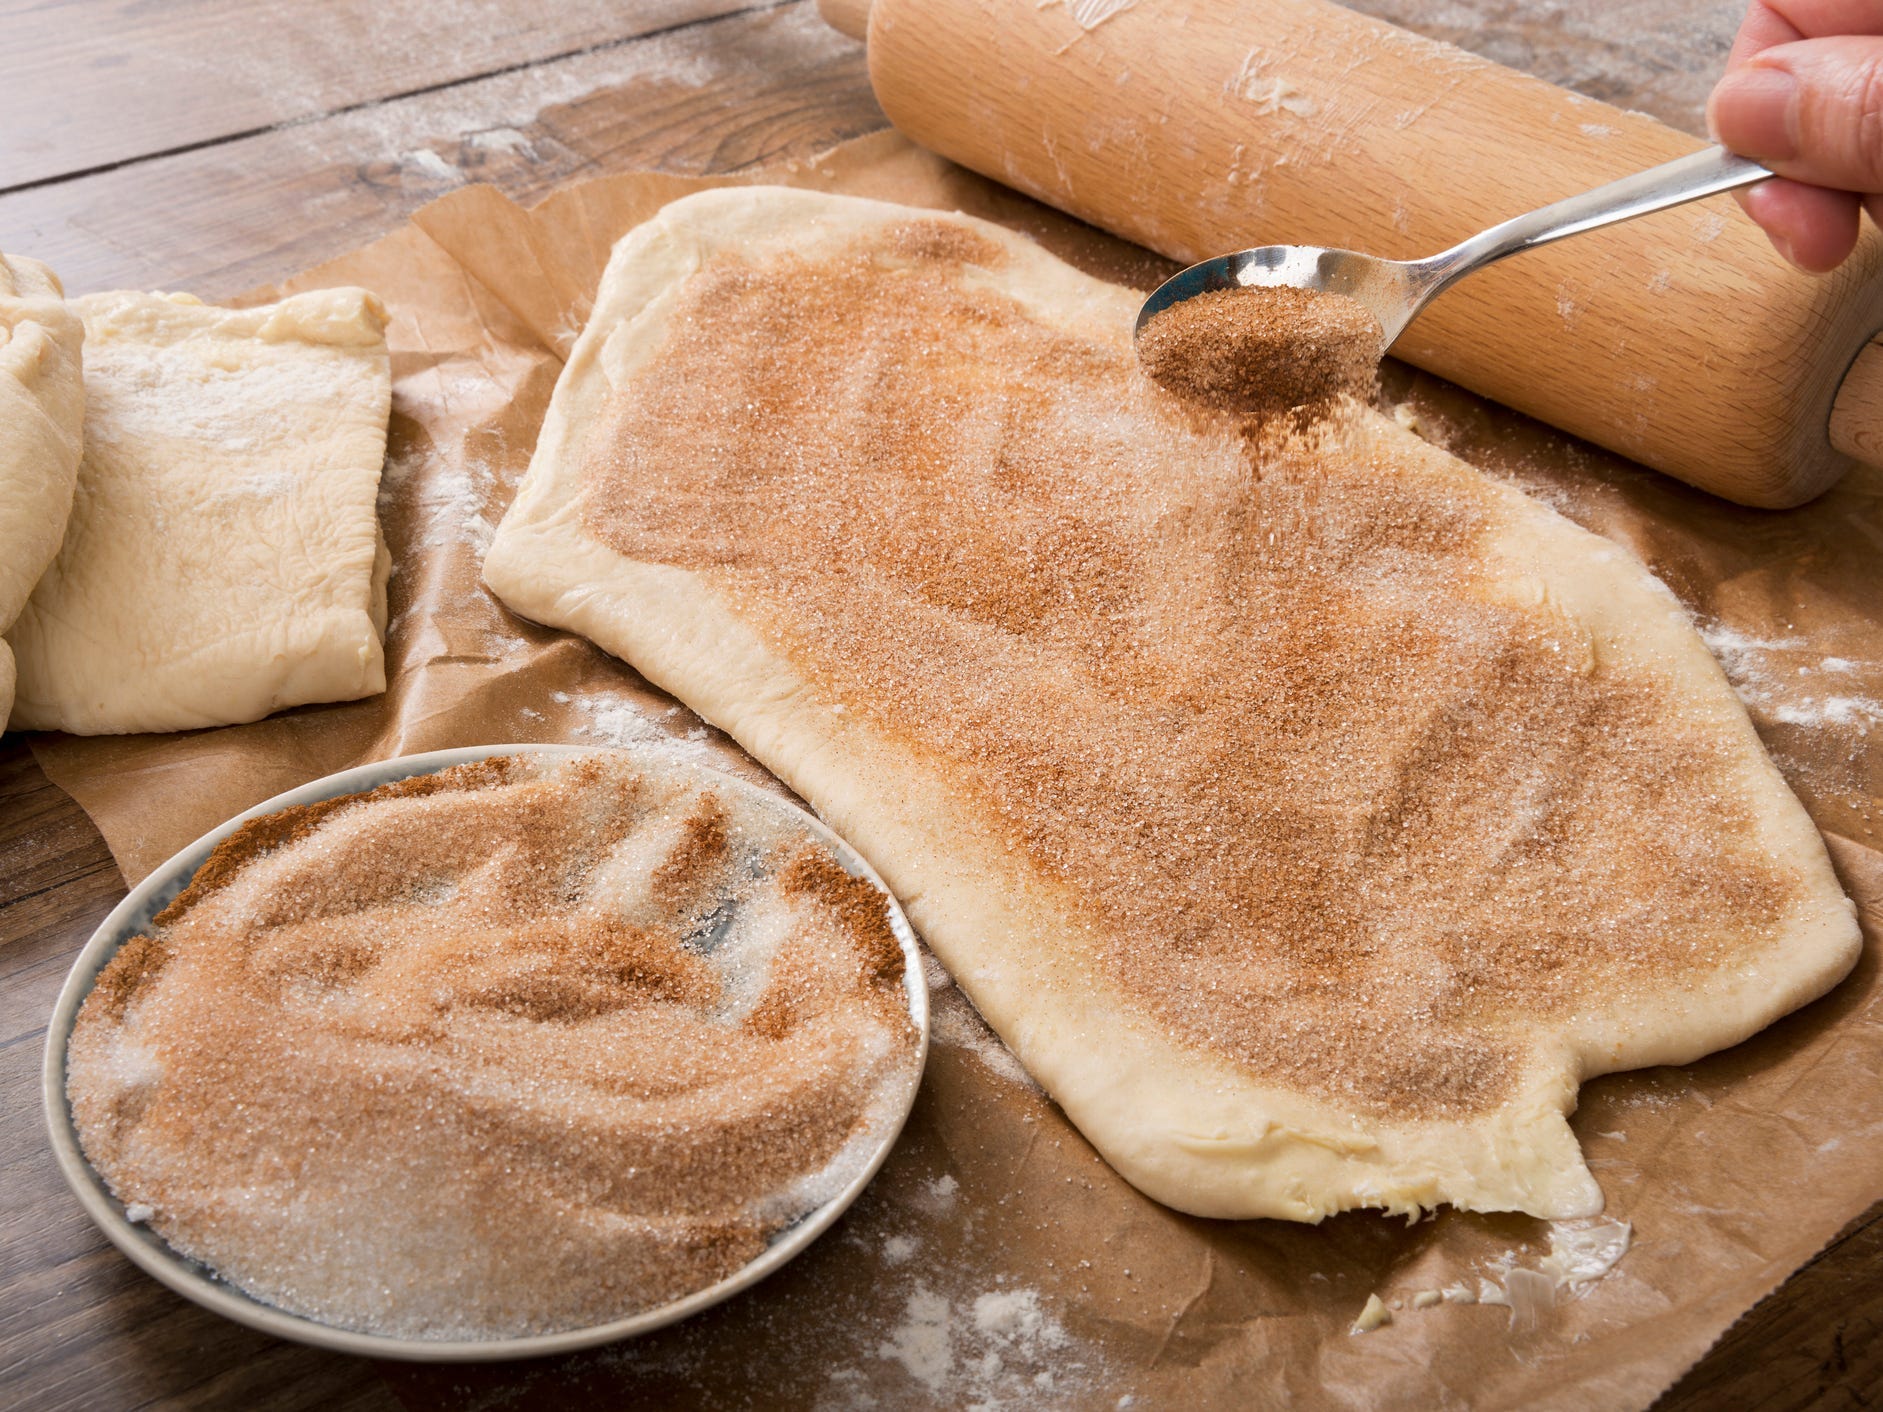 A hand using a spoon to sprinkle cinnamon sugar over rolled out pastry dough